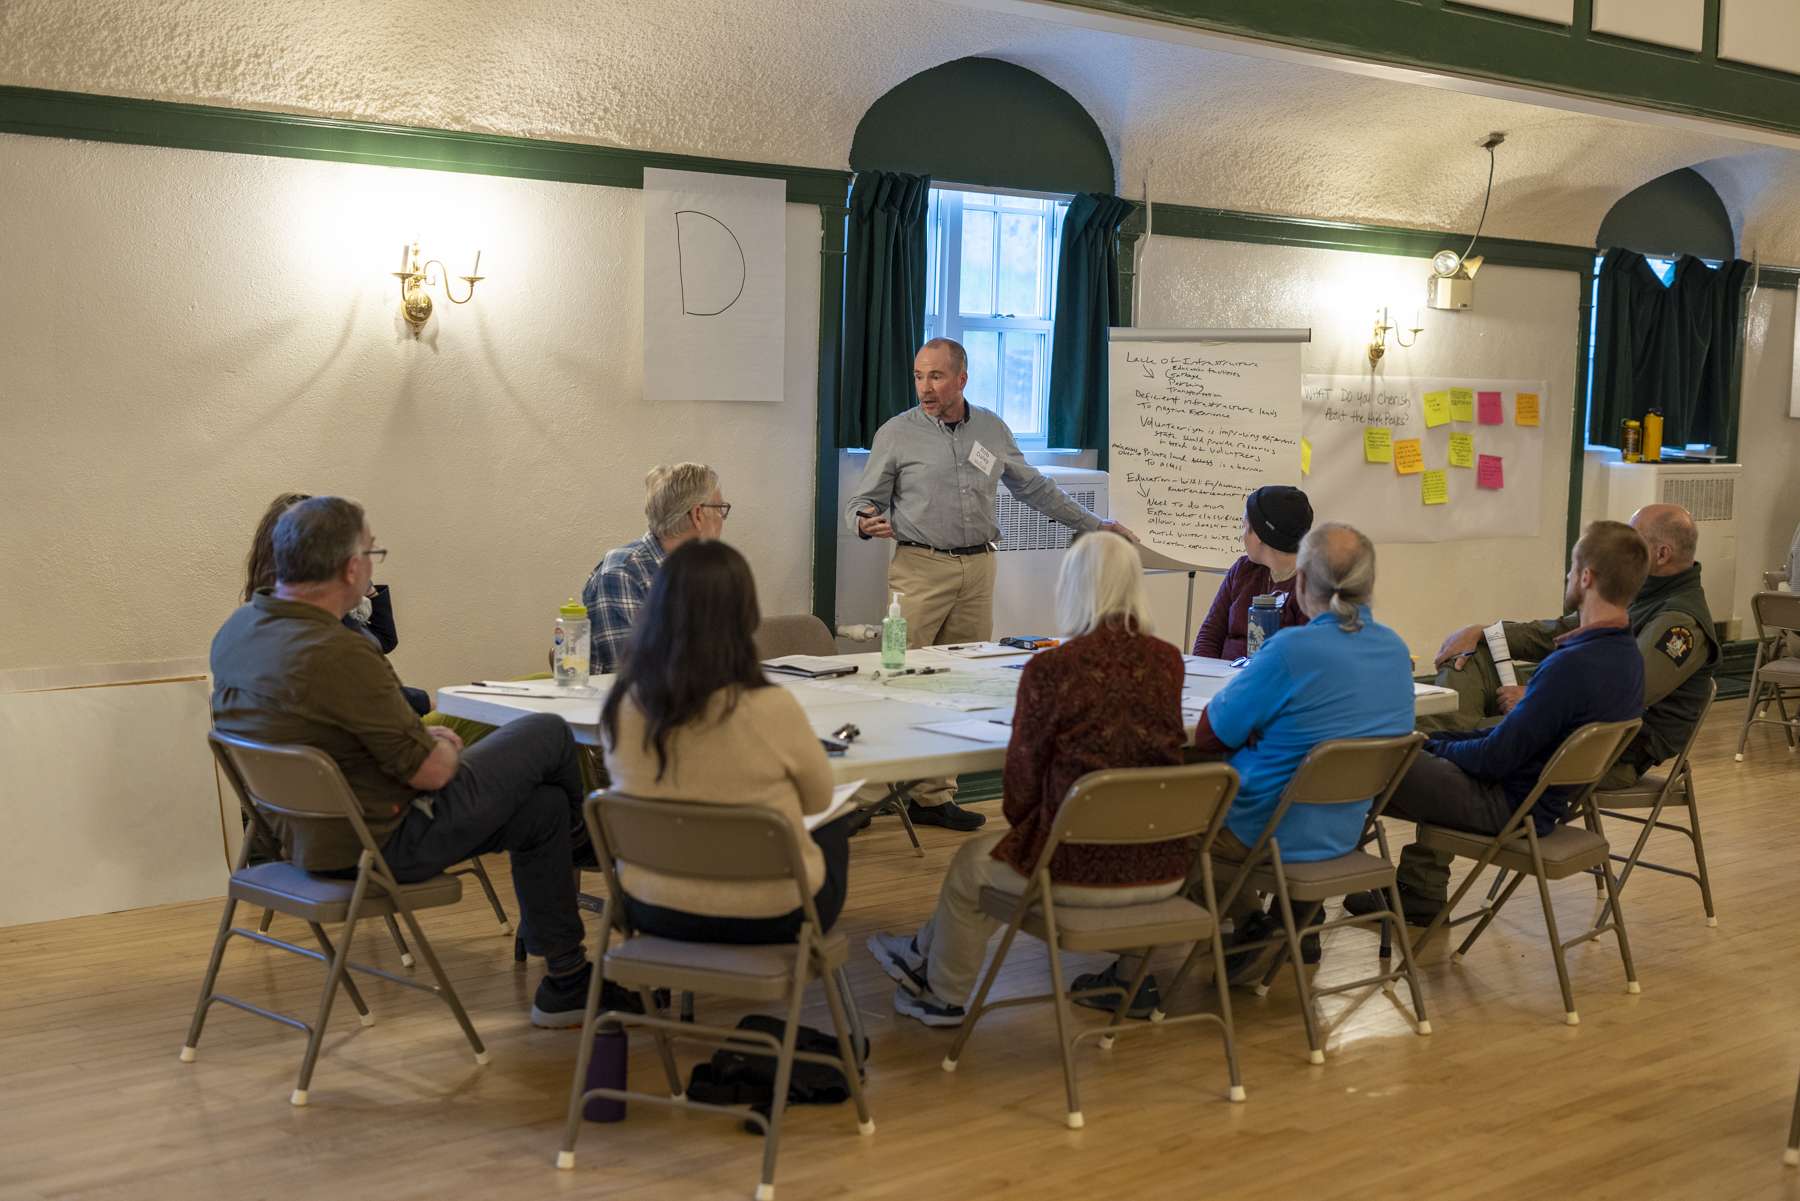 Rob Daley, of the DEC, solicits input from members of the public at the High Peaks visitor management meeting in Saranac Lake. Photo by Mike Lynch